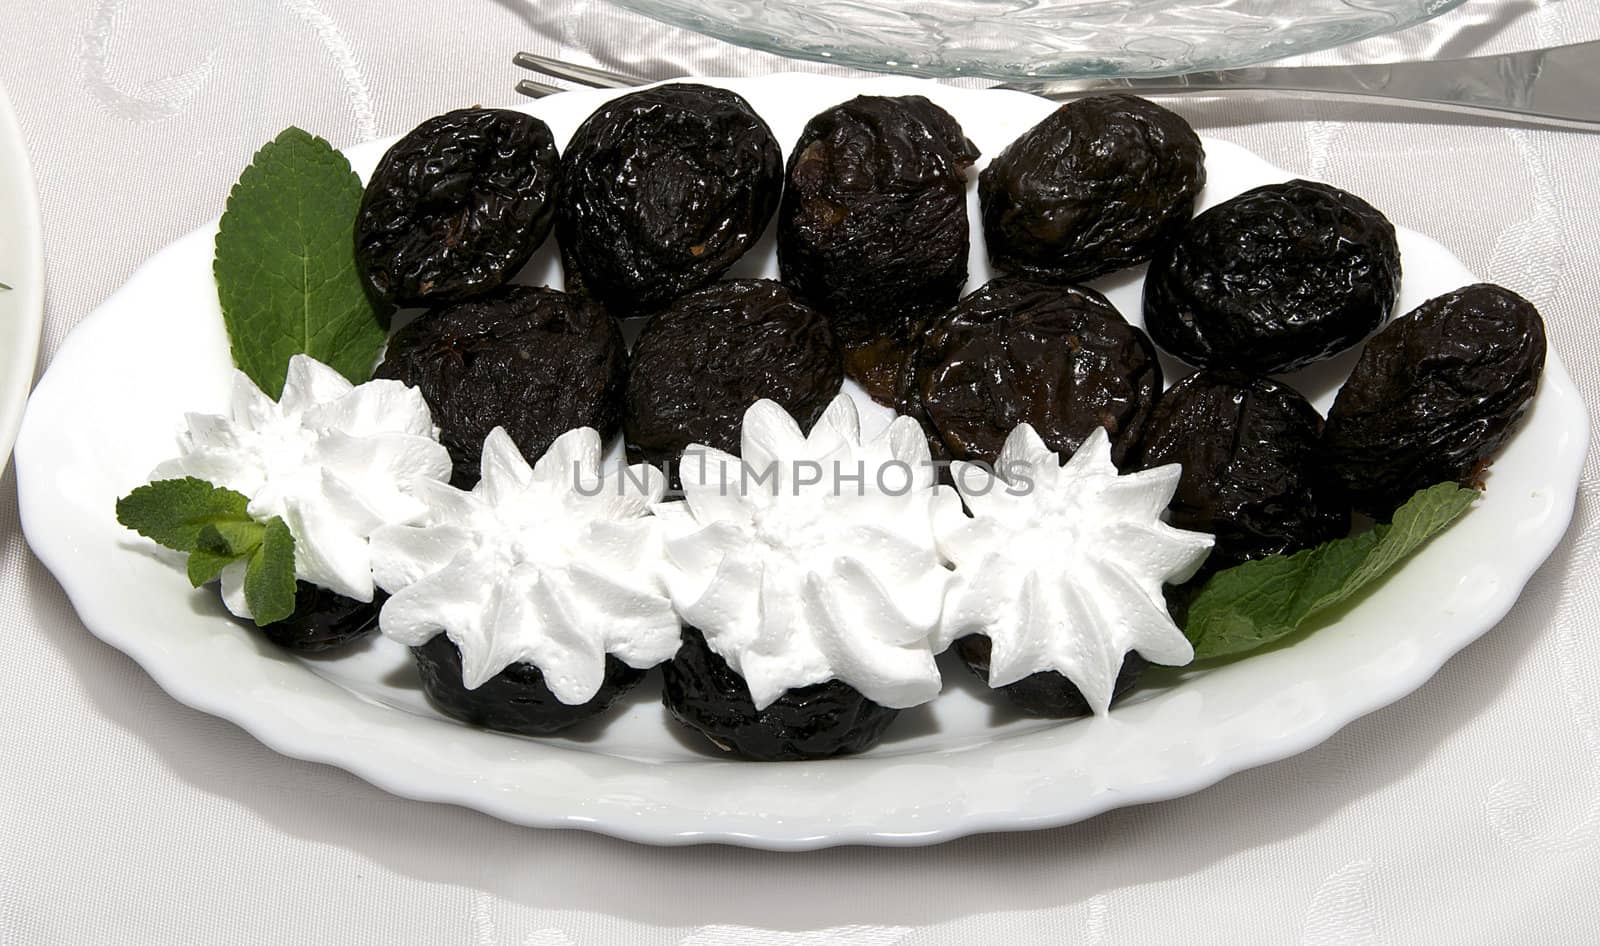 prunes and marshmallow cream on a plate on the table